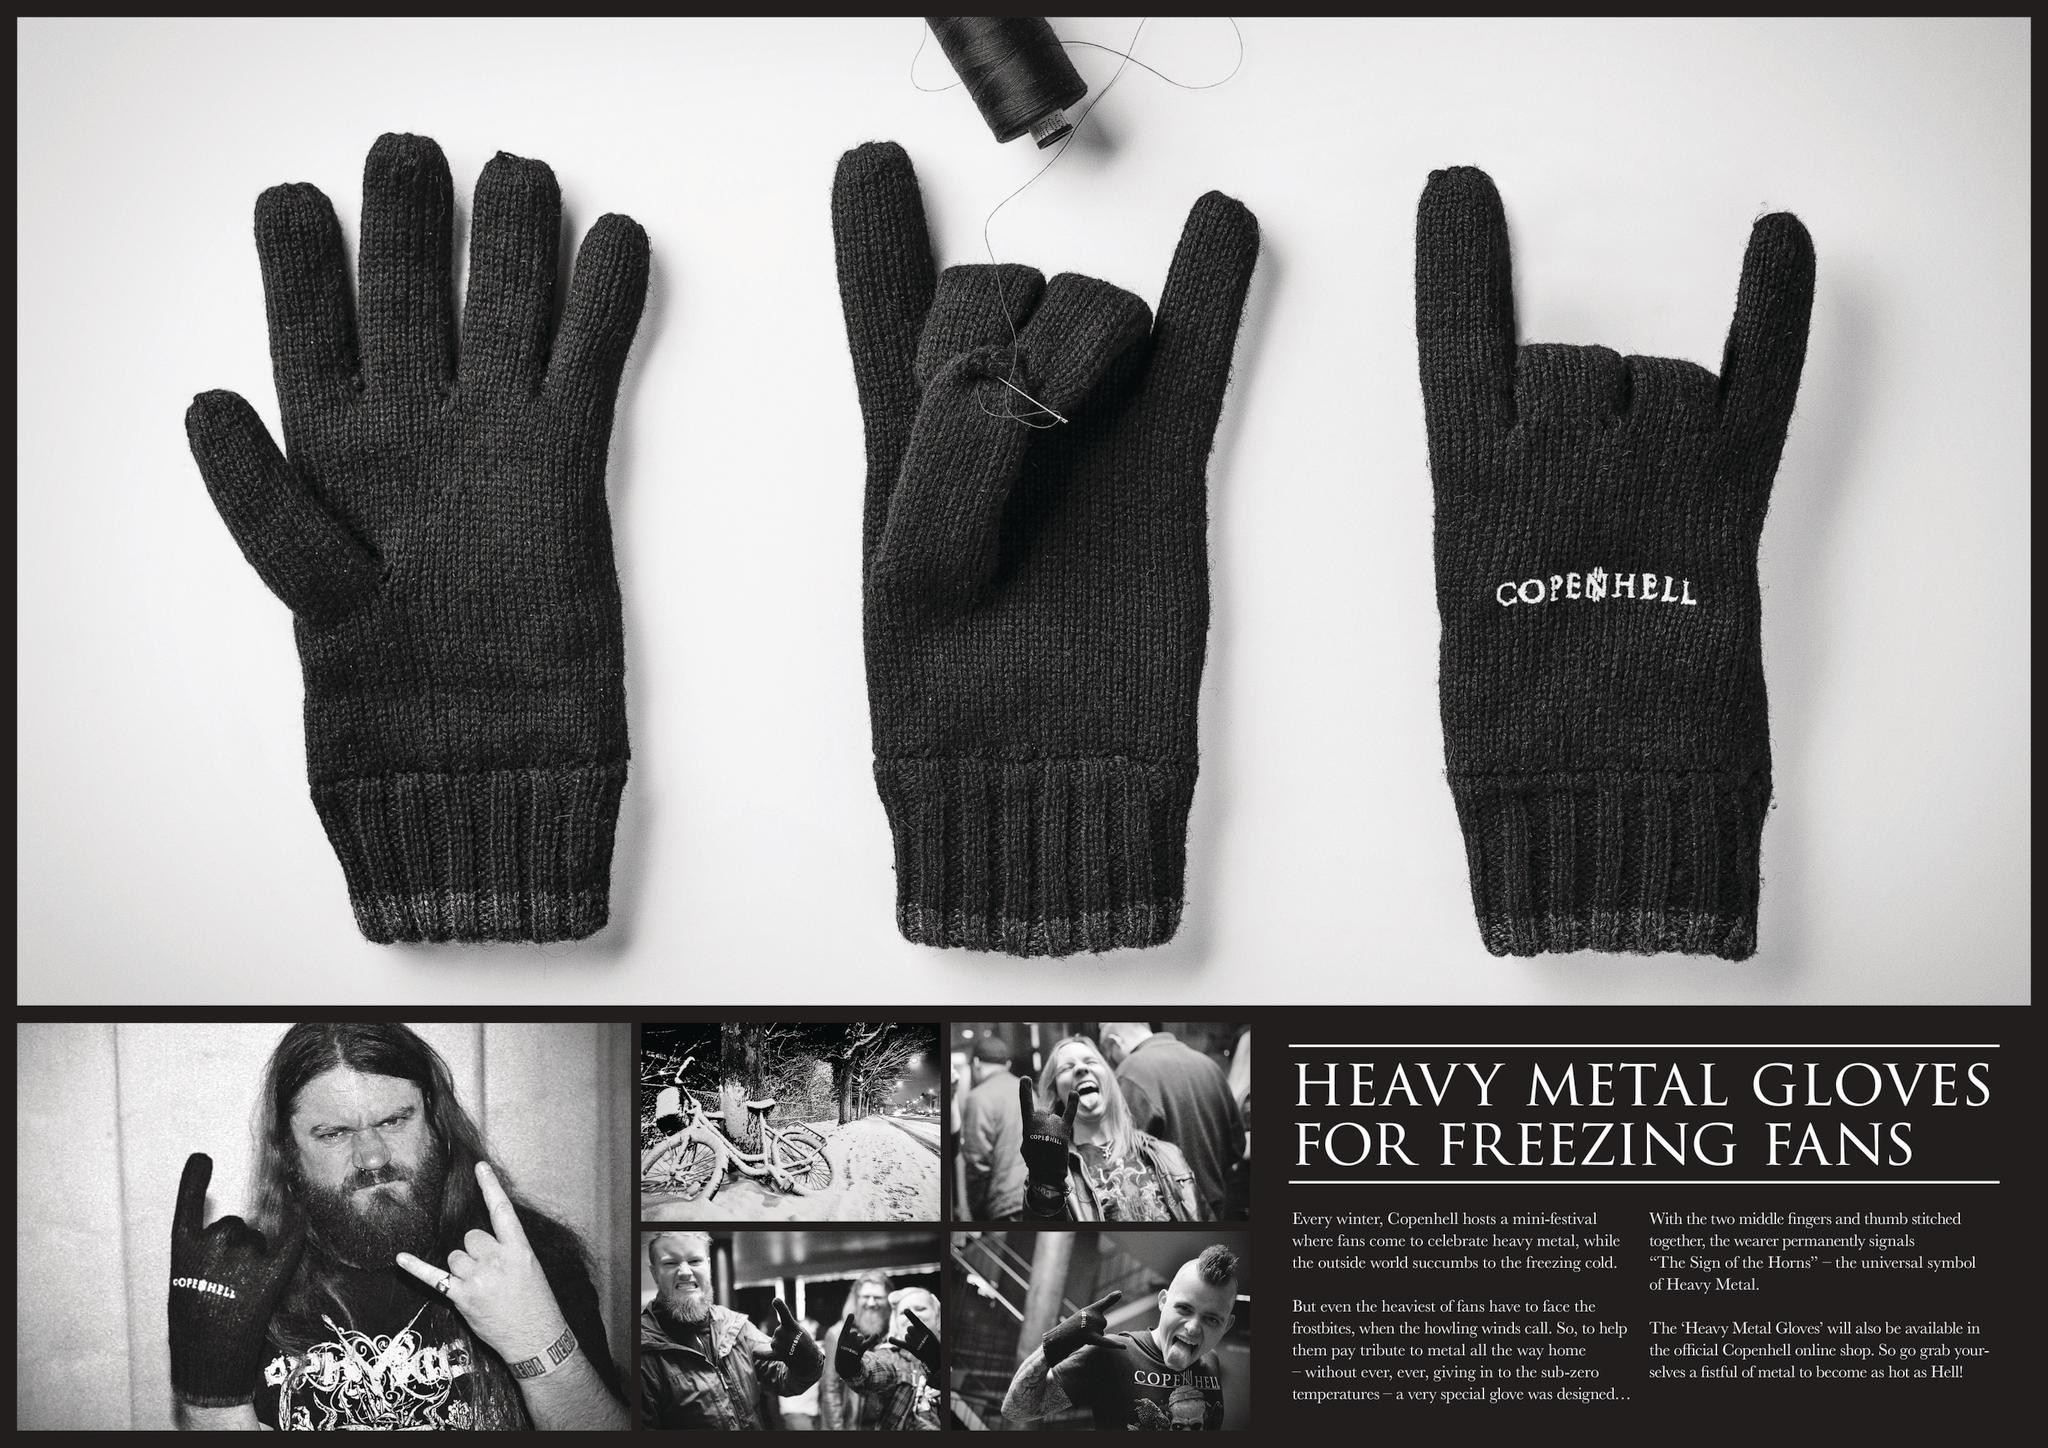 A FISTFUL OF METAL